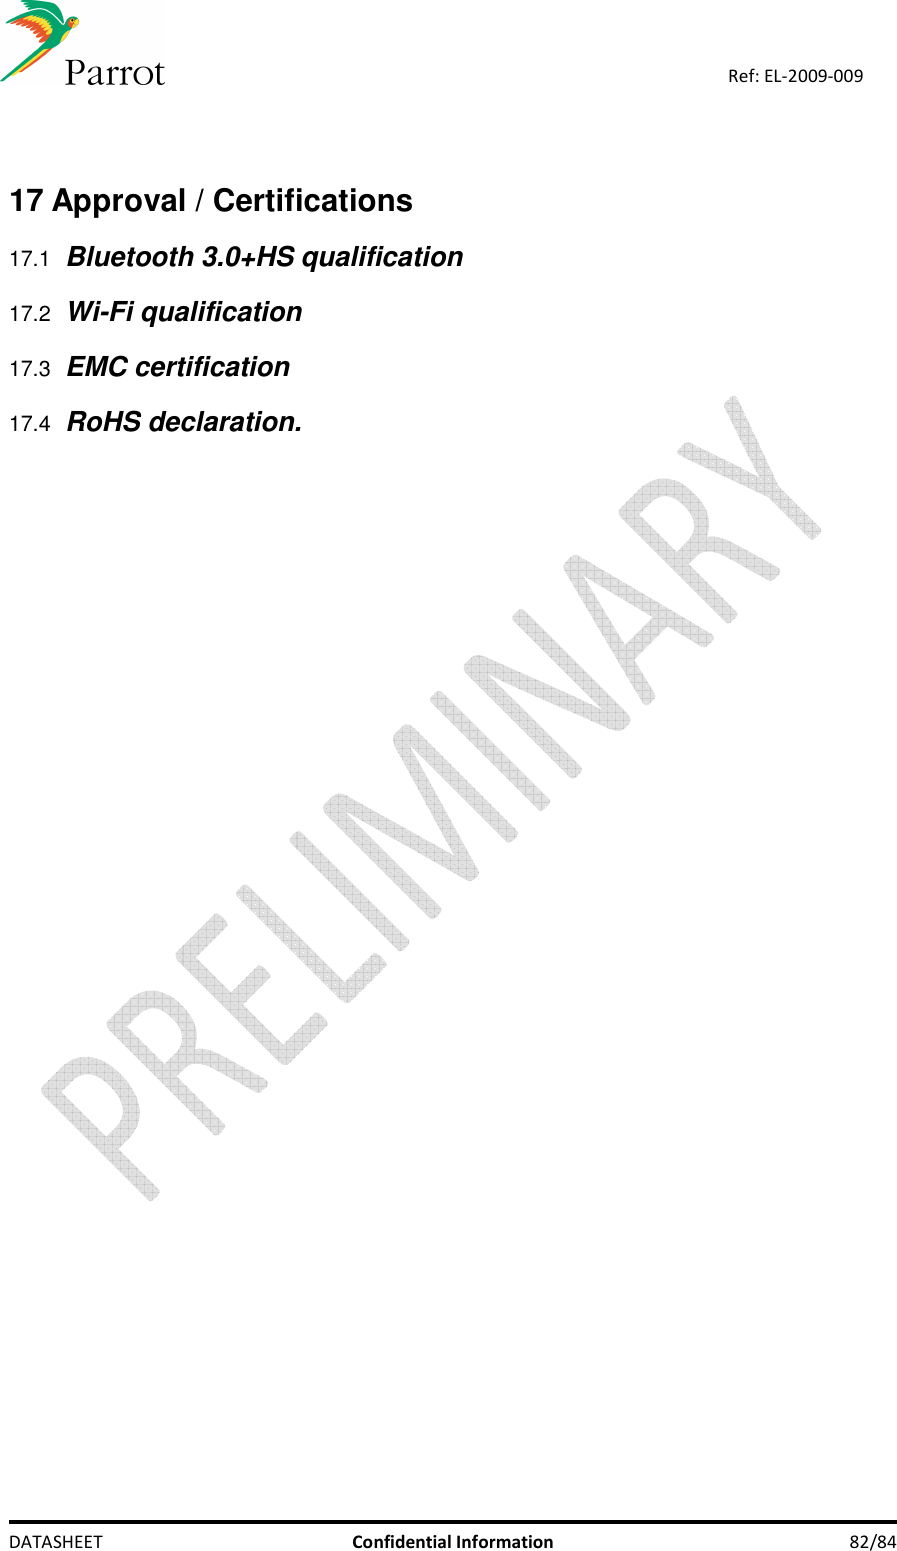    DATASHEET  Confidential Information  82/84 Ref: EL-2009-009  17 Approval / Certifications 17.1 Bluetooth 3.0+HS qualification 17.2 Wi-Fi qualification 17.3 EMC certification 17.4 RoHS declaration. 